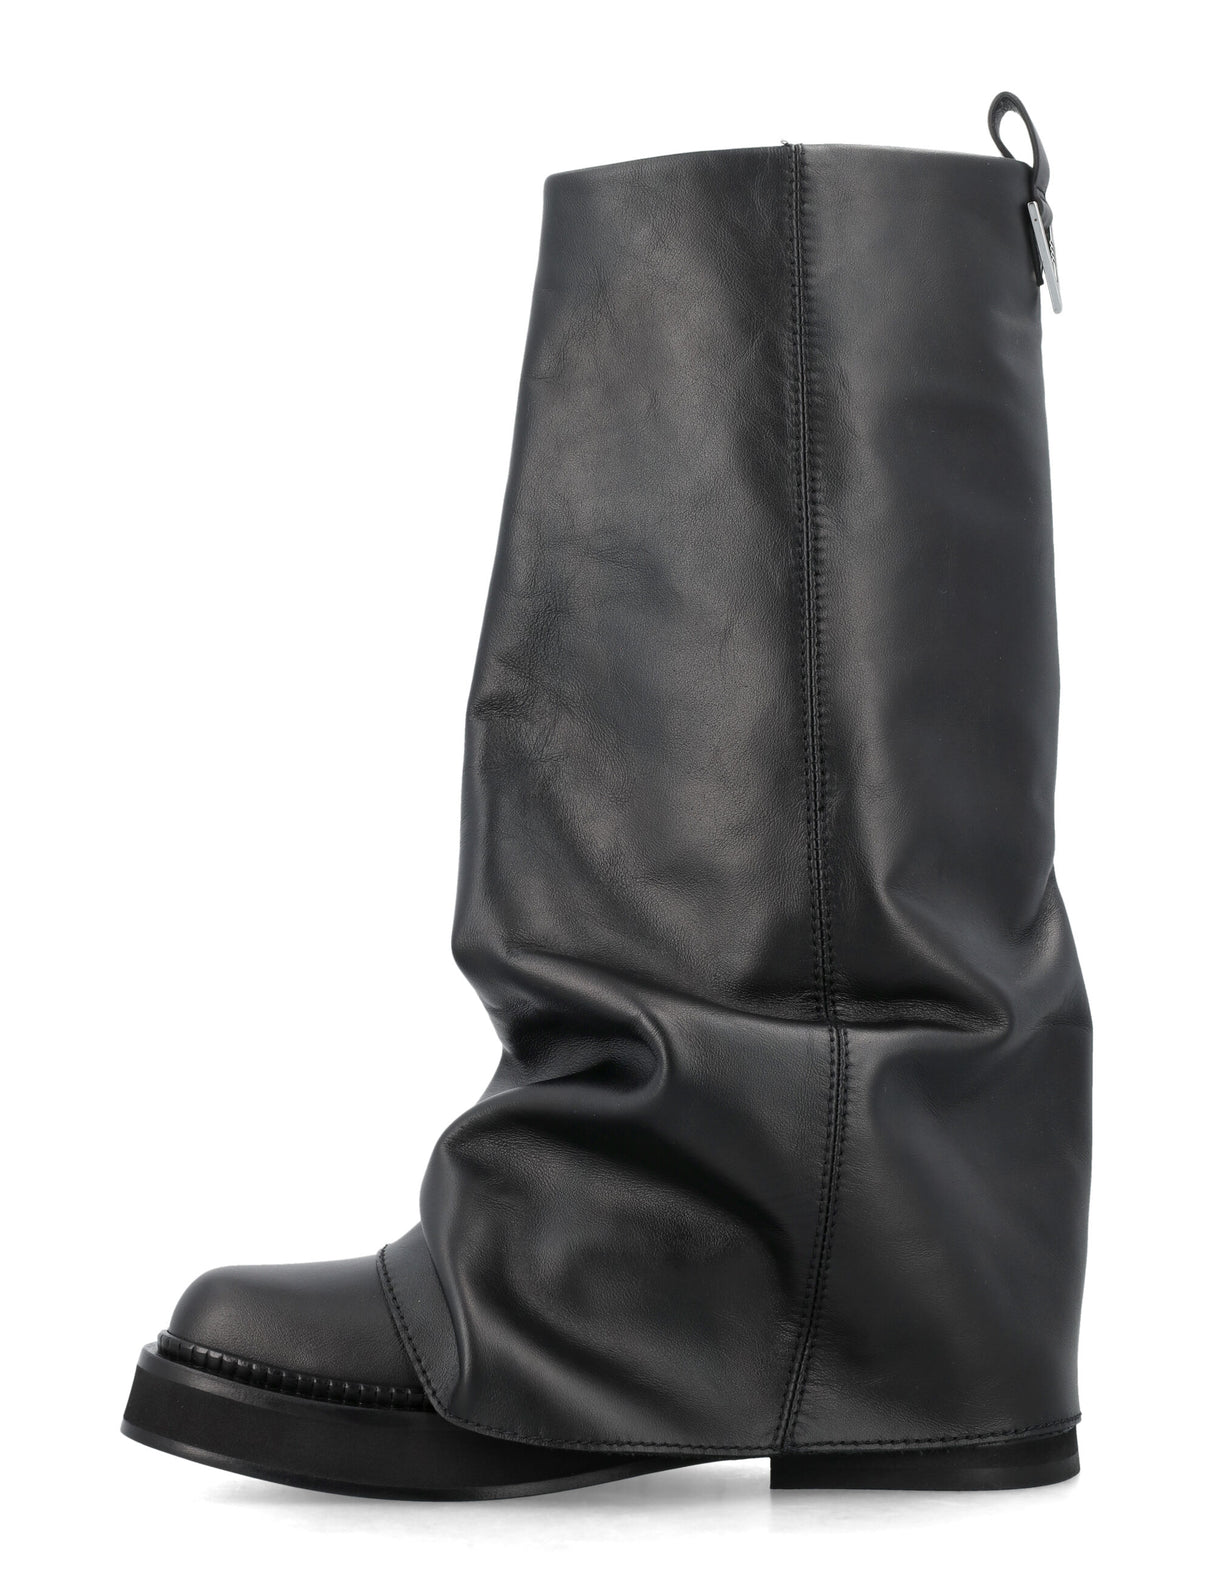 Women's Combat Robin Boots with Square Toe and Metal Logo Detail